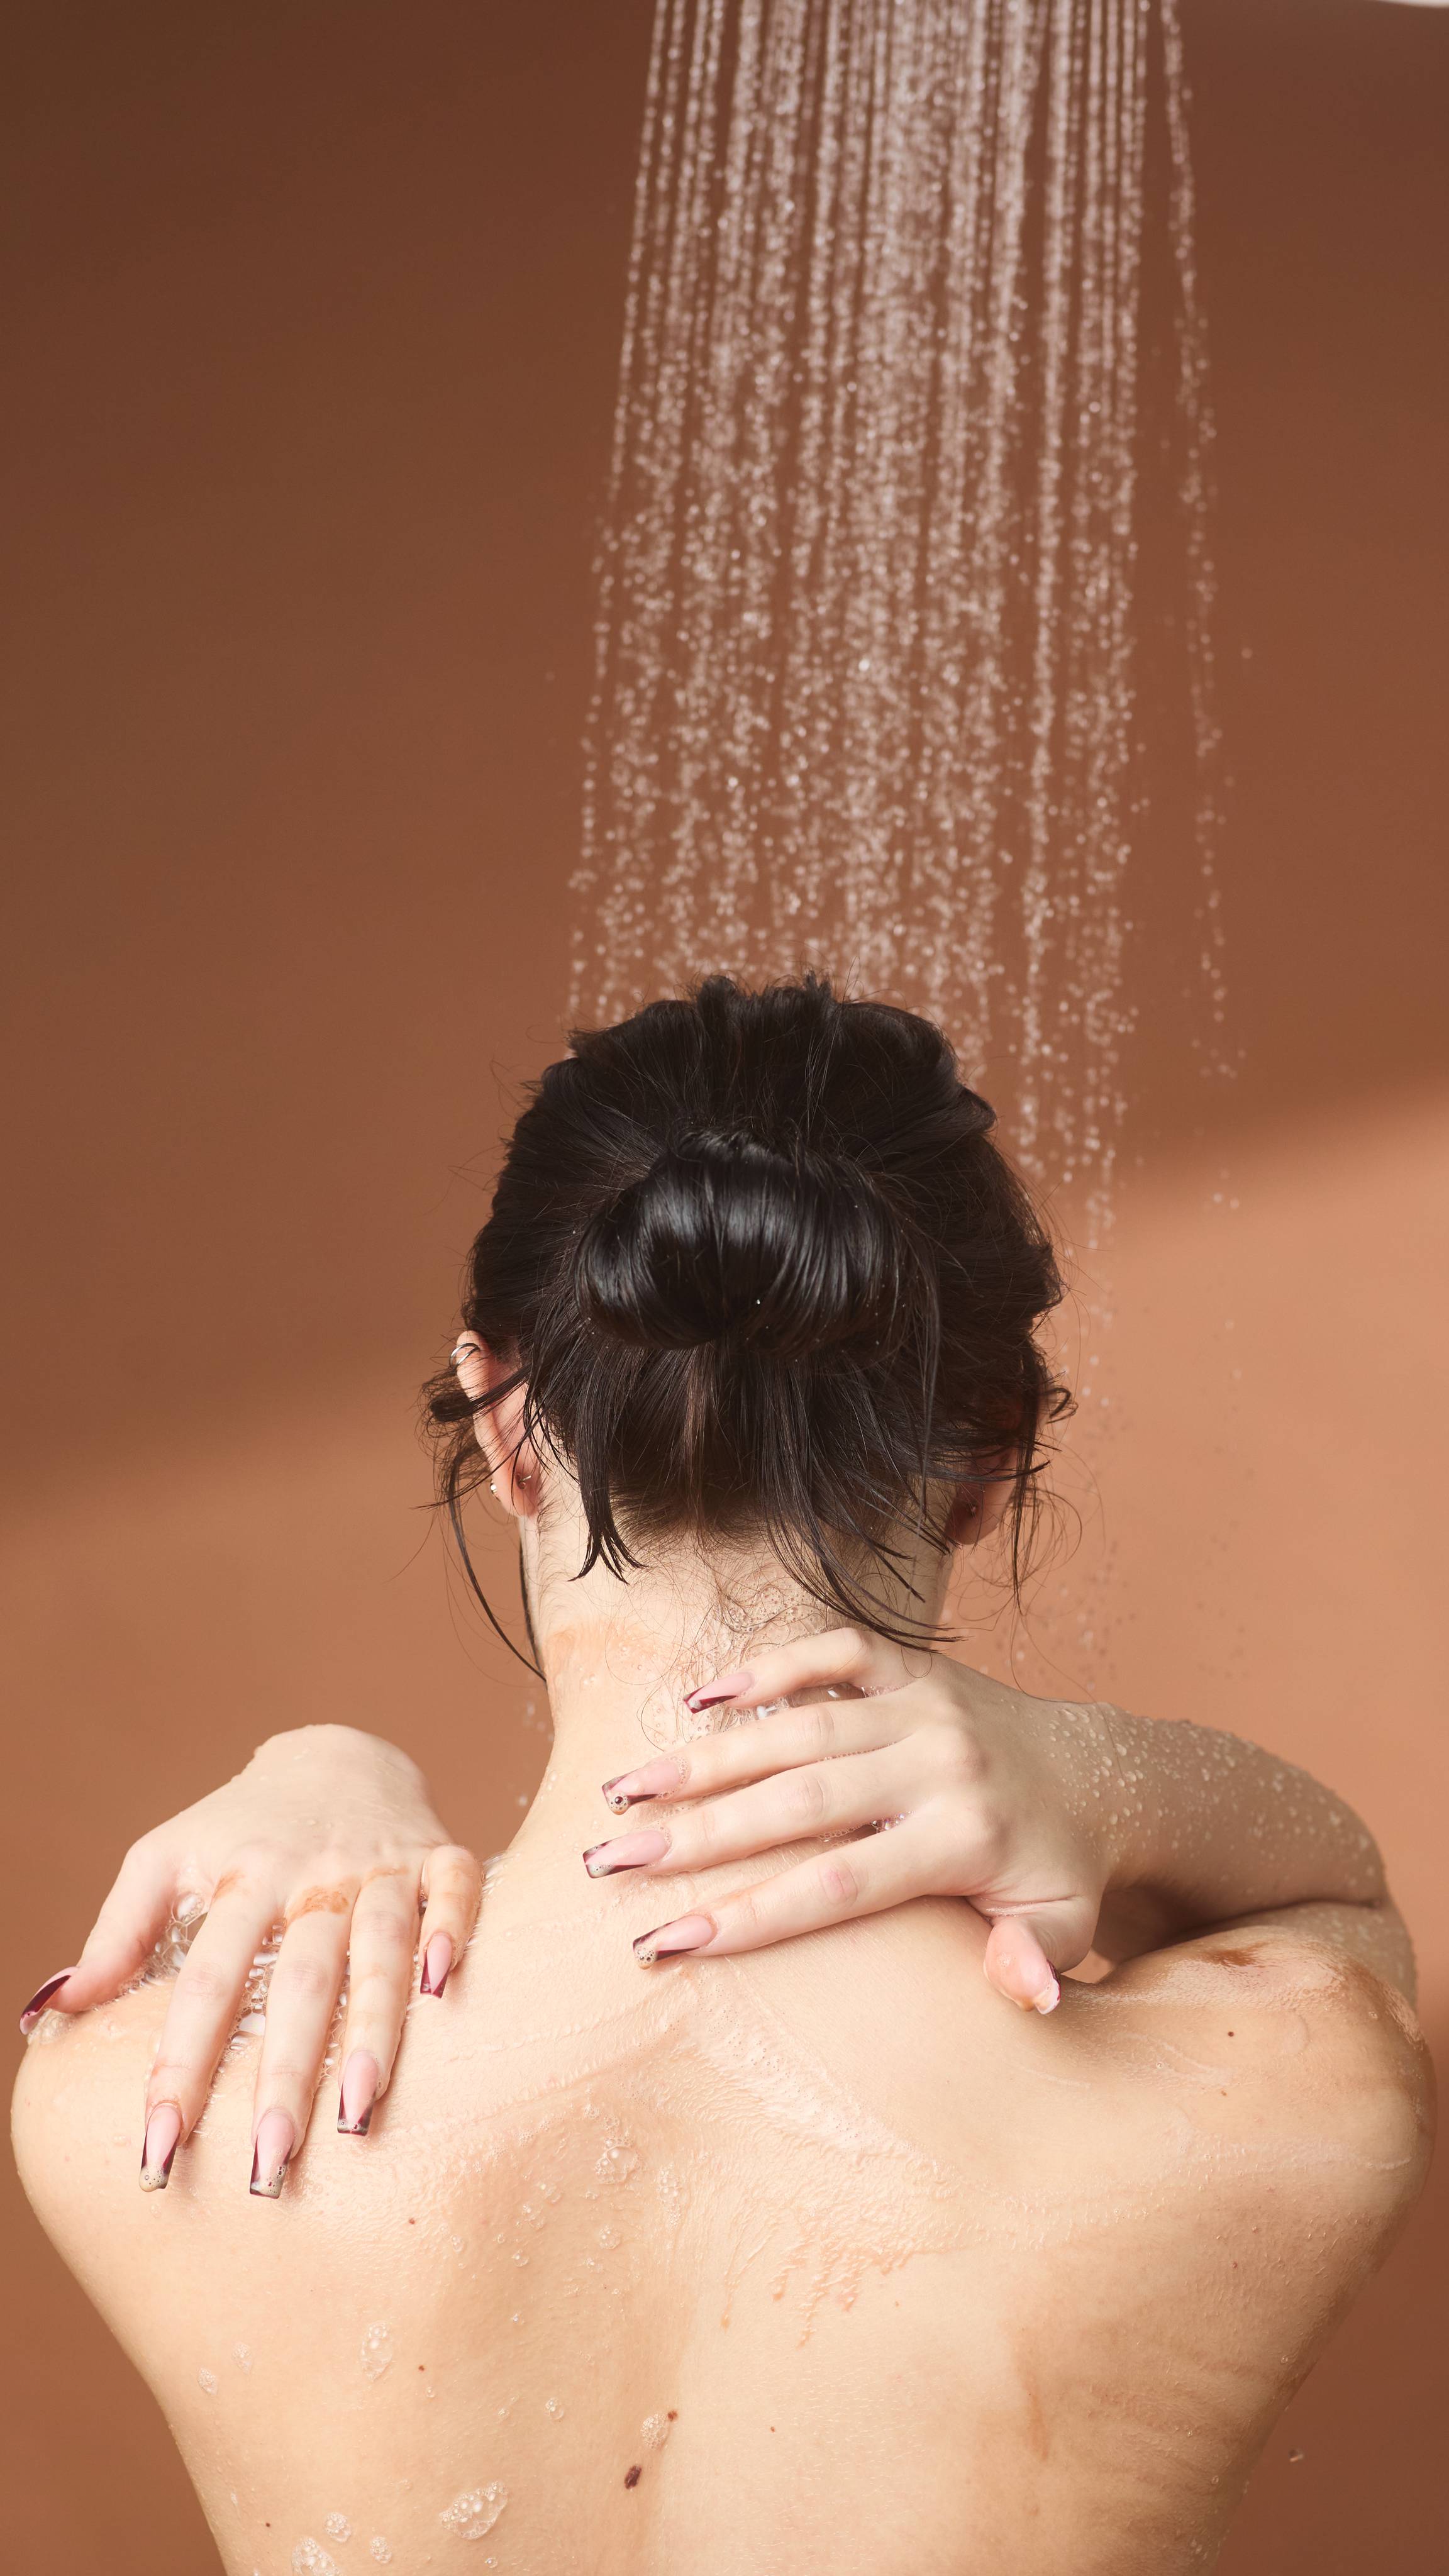 The model is standing under running shower water on a warm, earth-toned background as they lather their neck and shoulder with the Posh Chocolate shower gel.